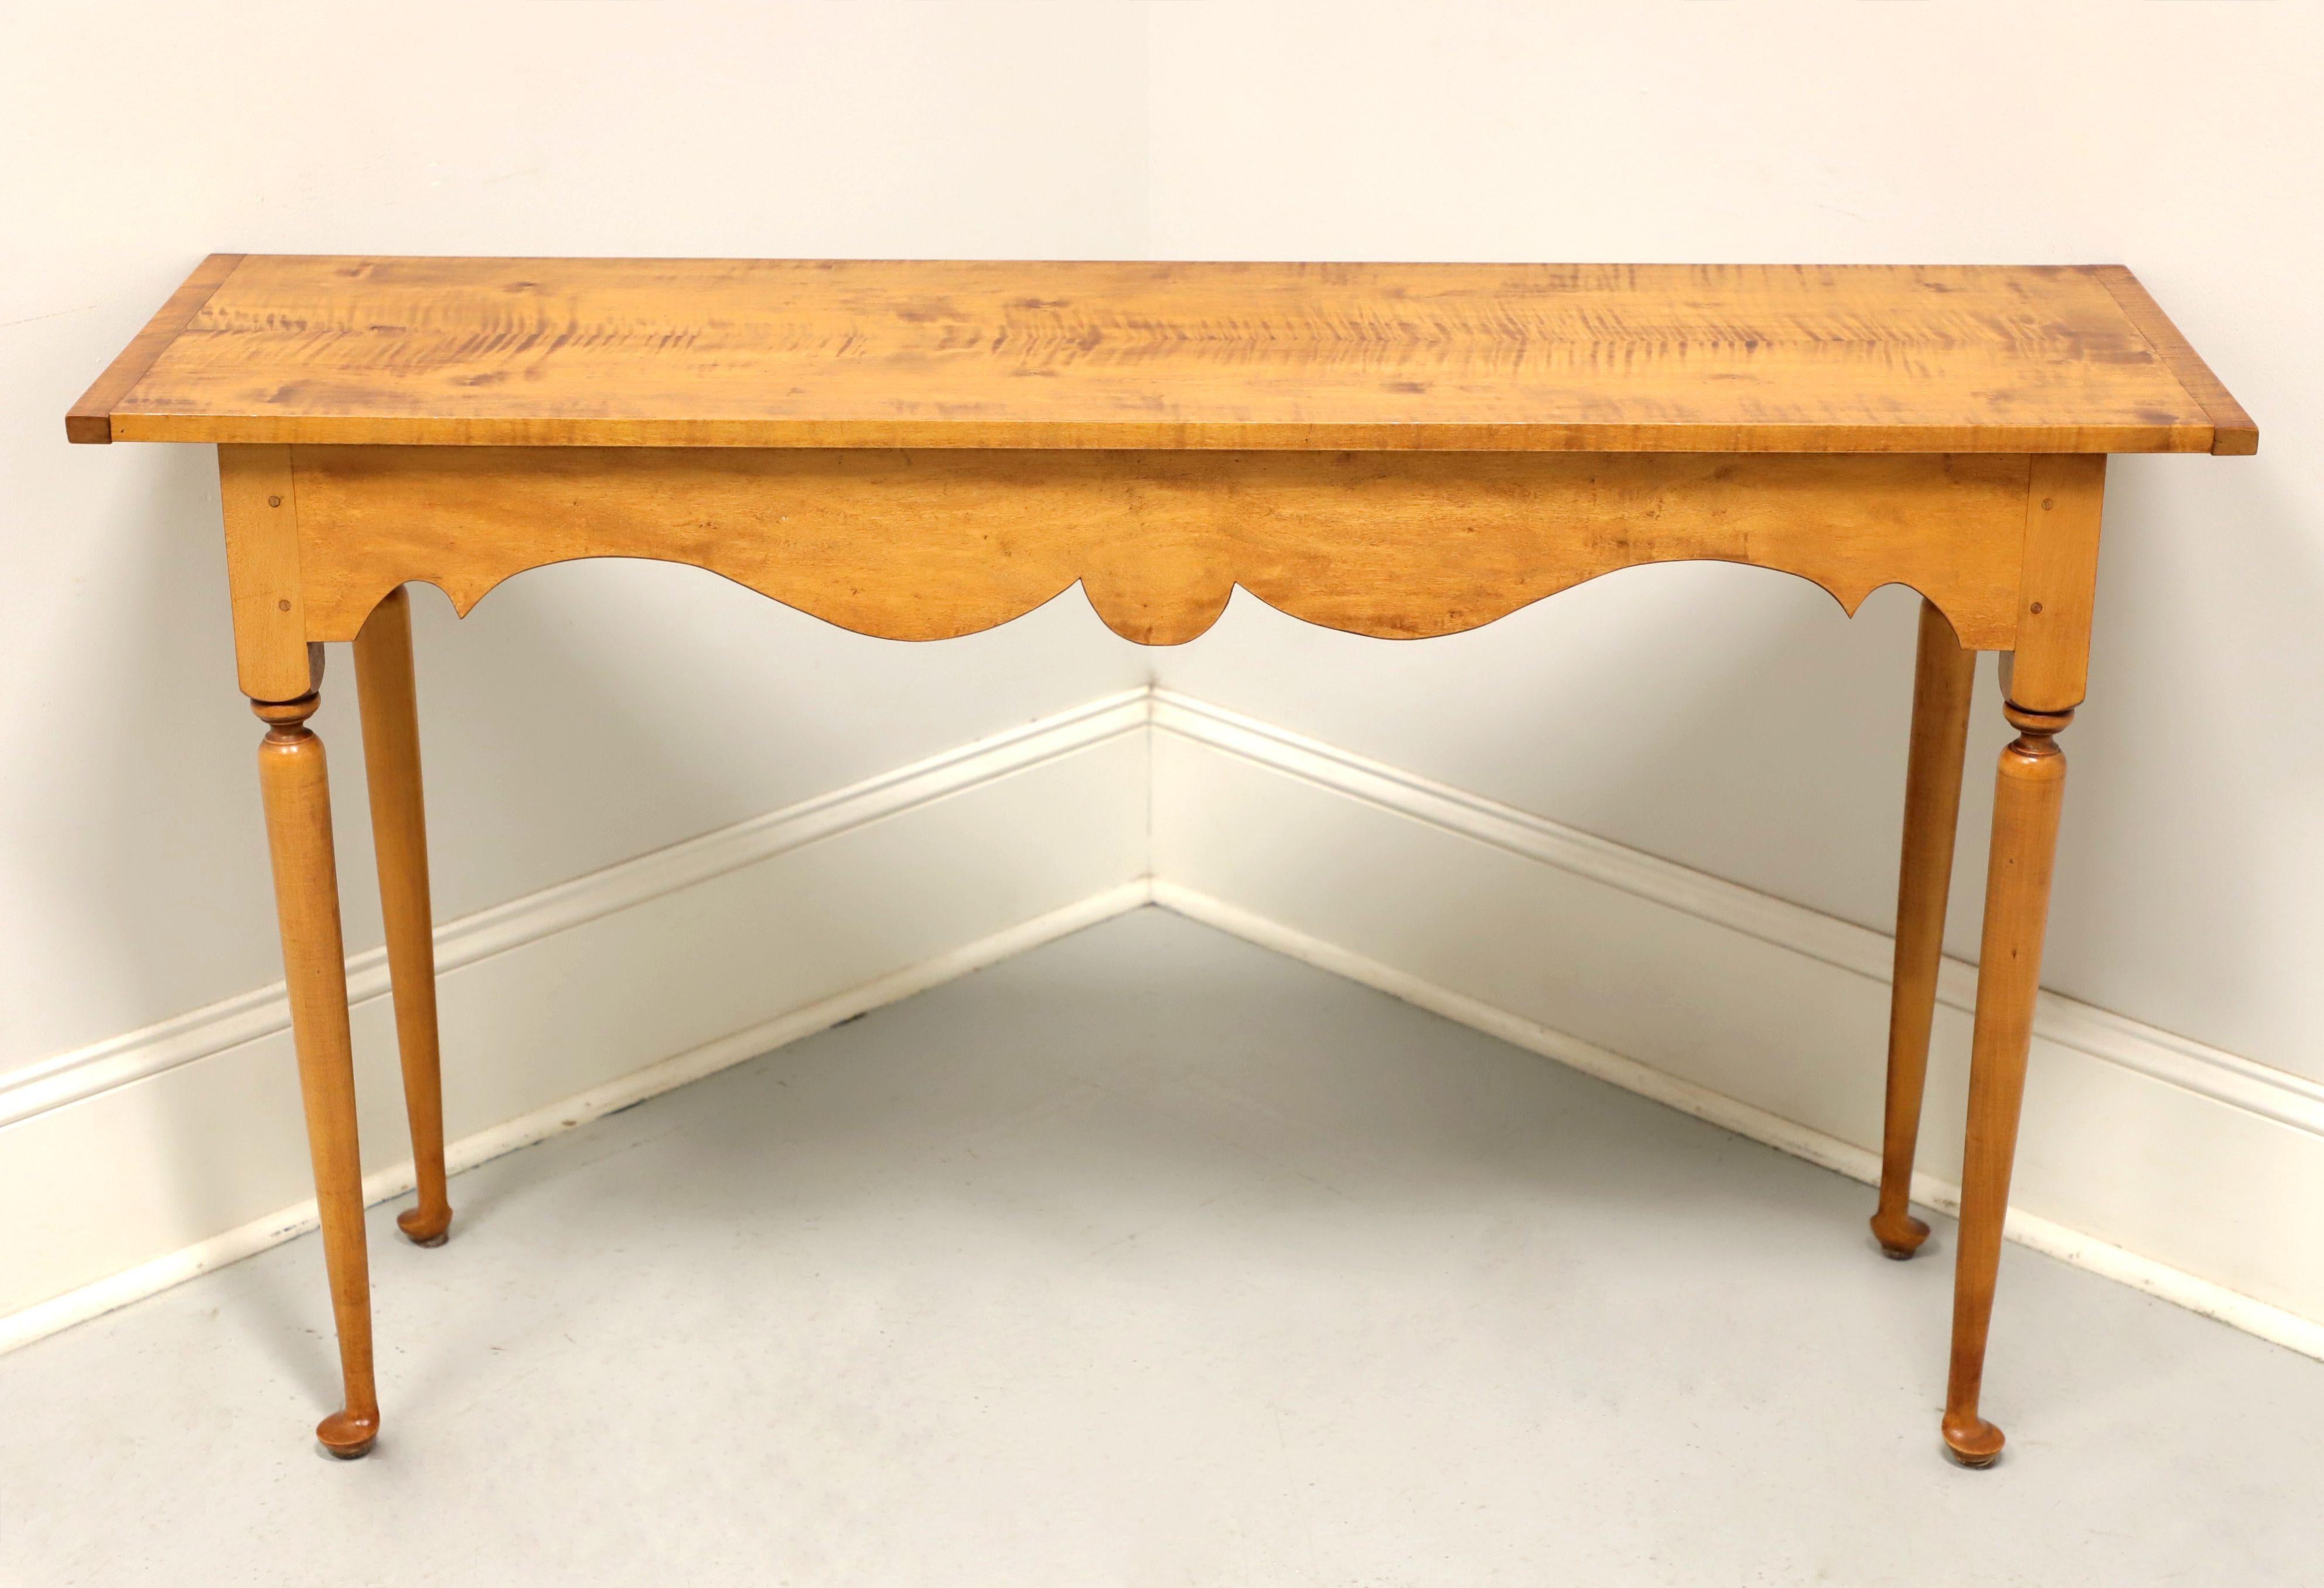 An American Colonial style console table by D.R. Dimes, of Strafford, New Hampshire, USA. Maple with tiger maple top, their 